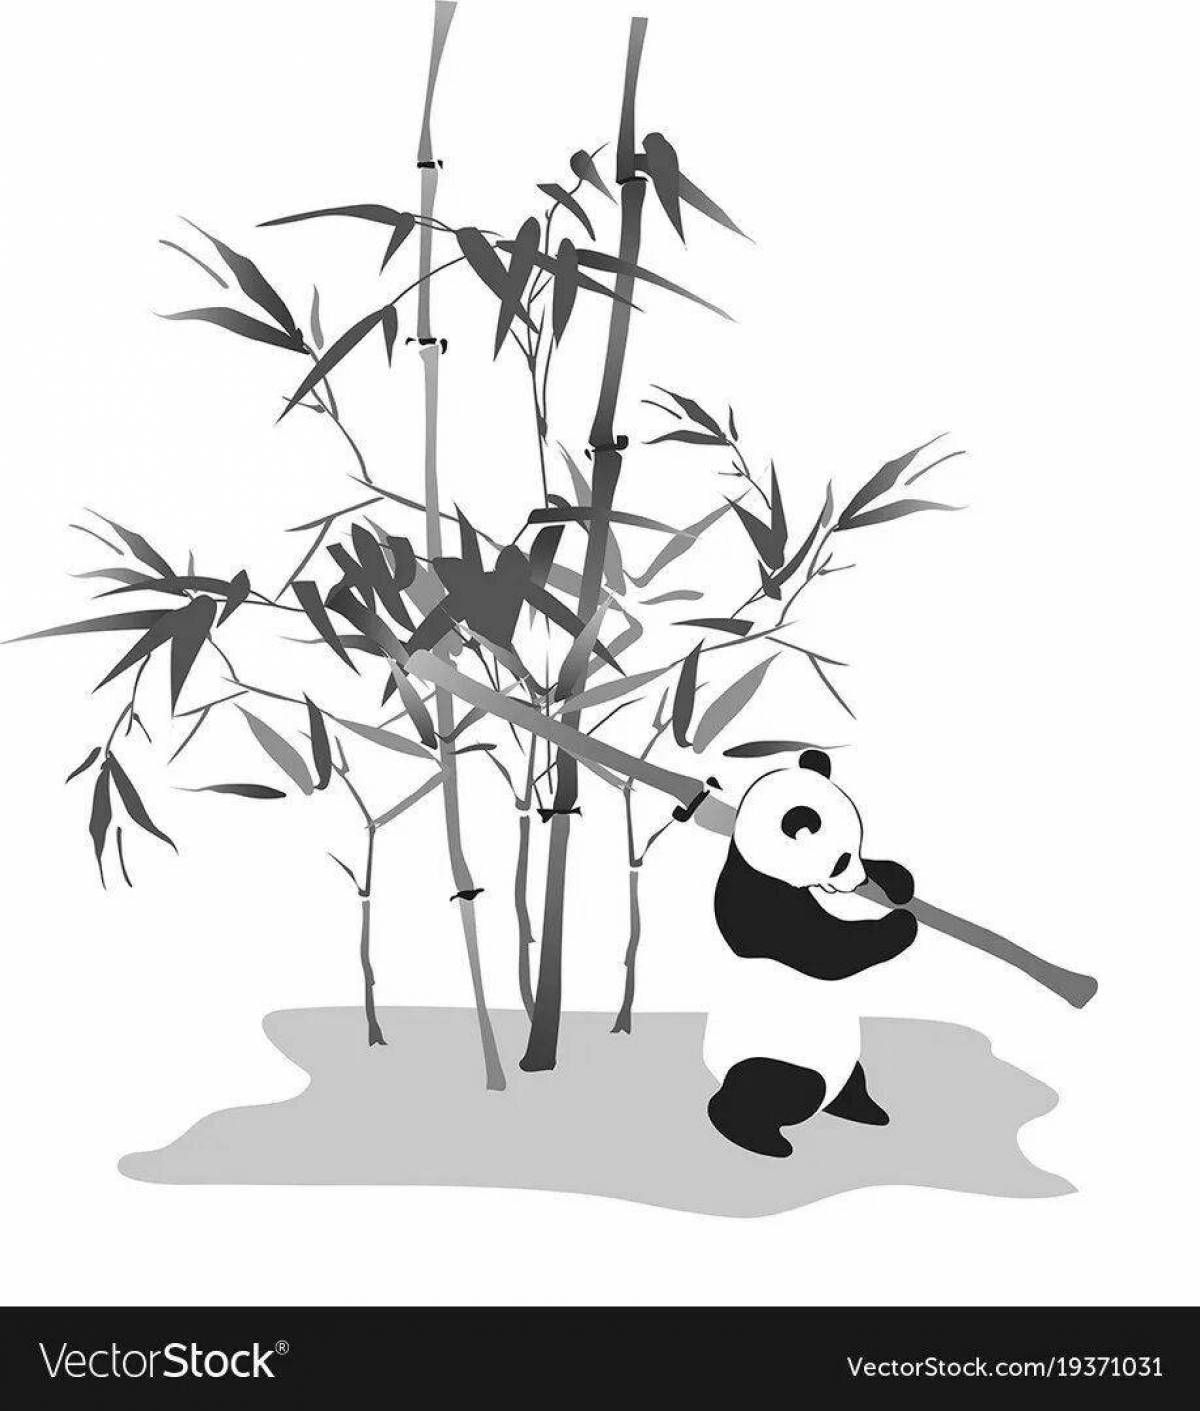 Awesome panda coloring book with bamboo